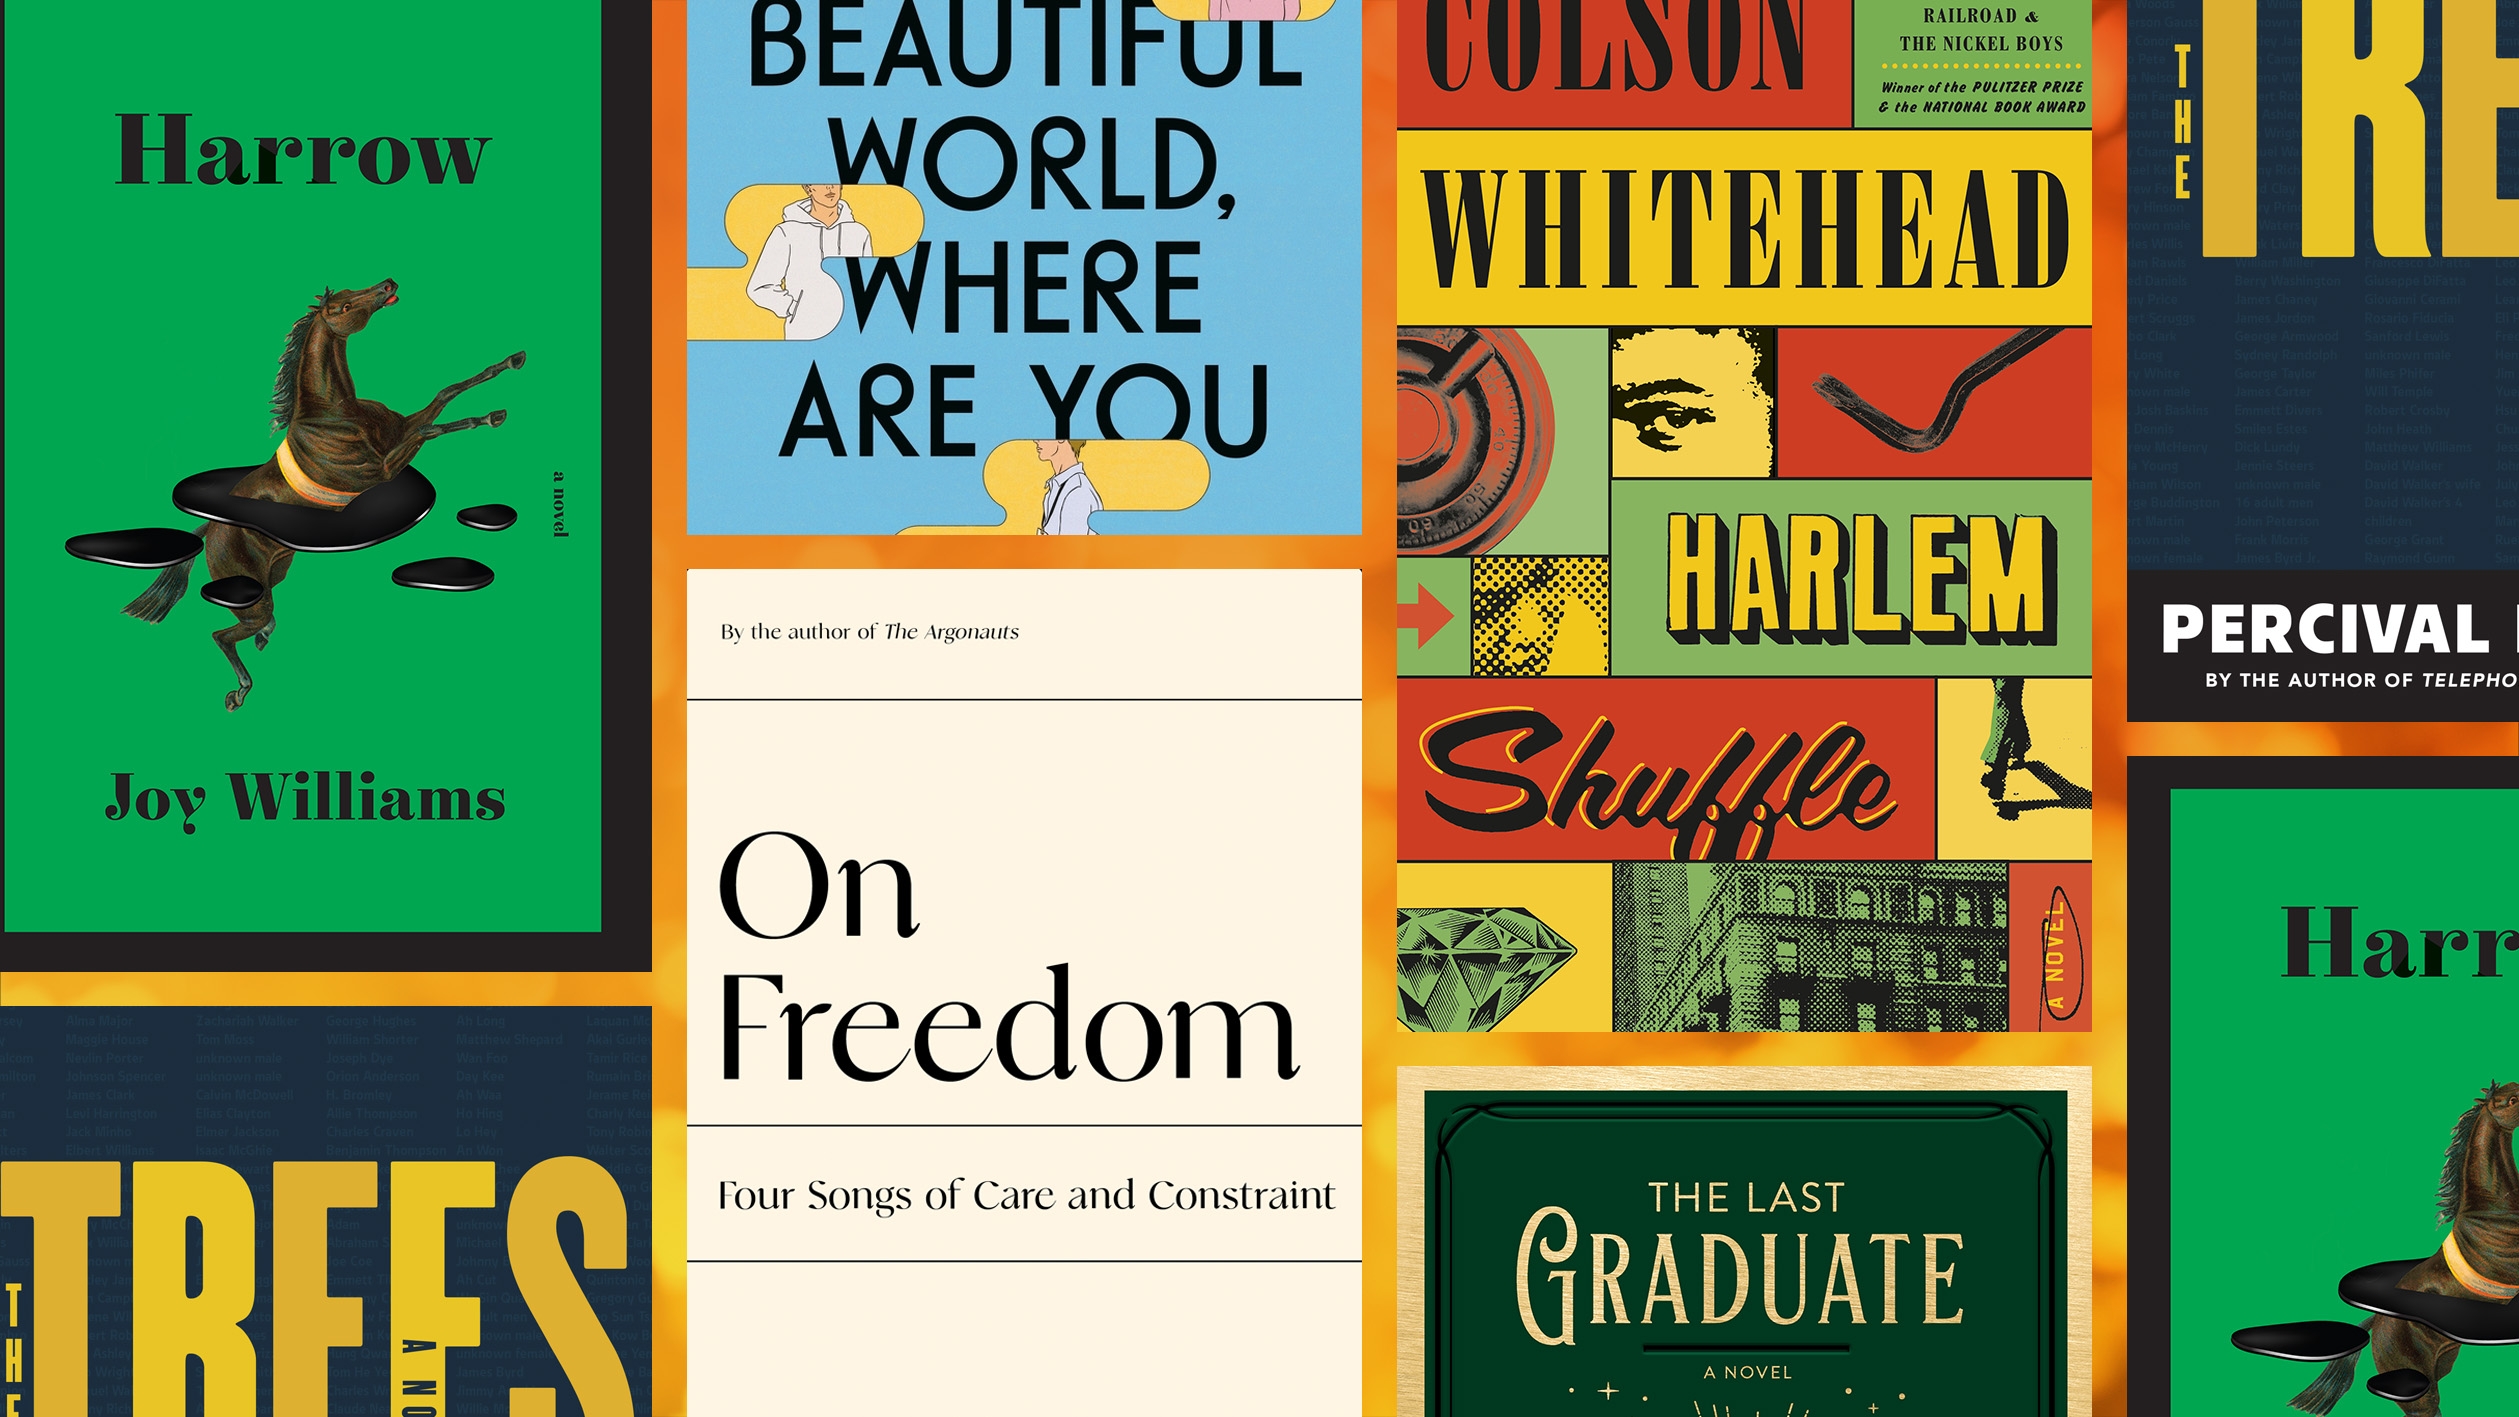 A new Sally Rooney, Joy Williams’ first novel in 20 years, and more books to read this September